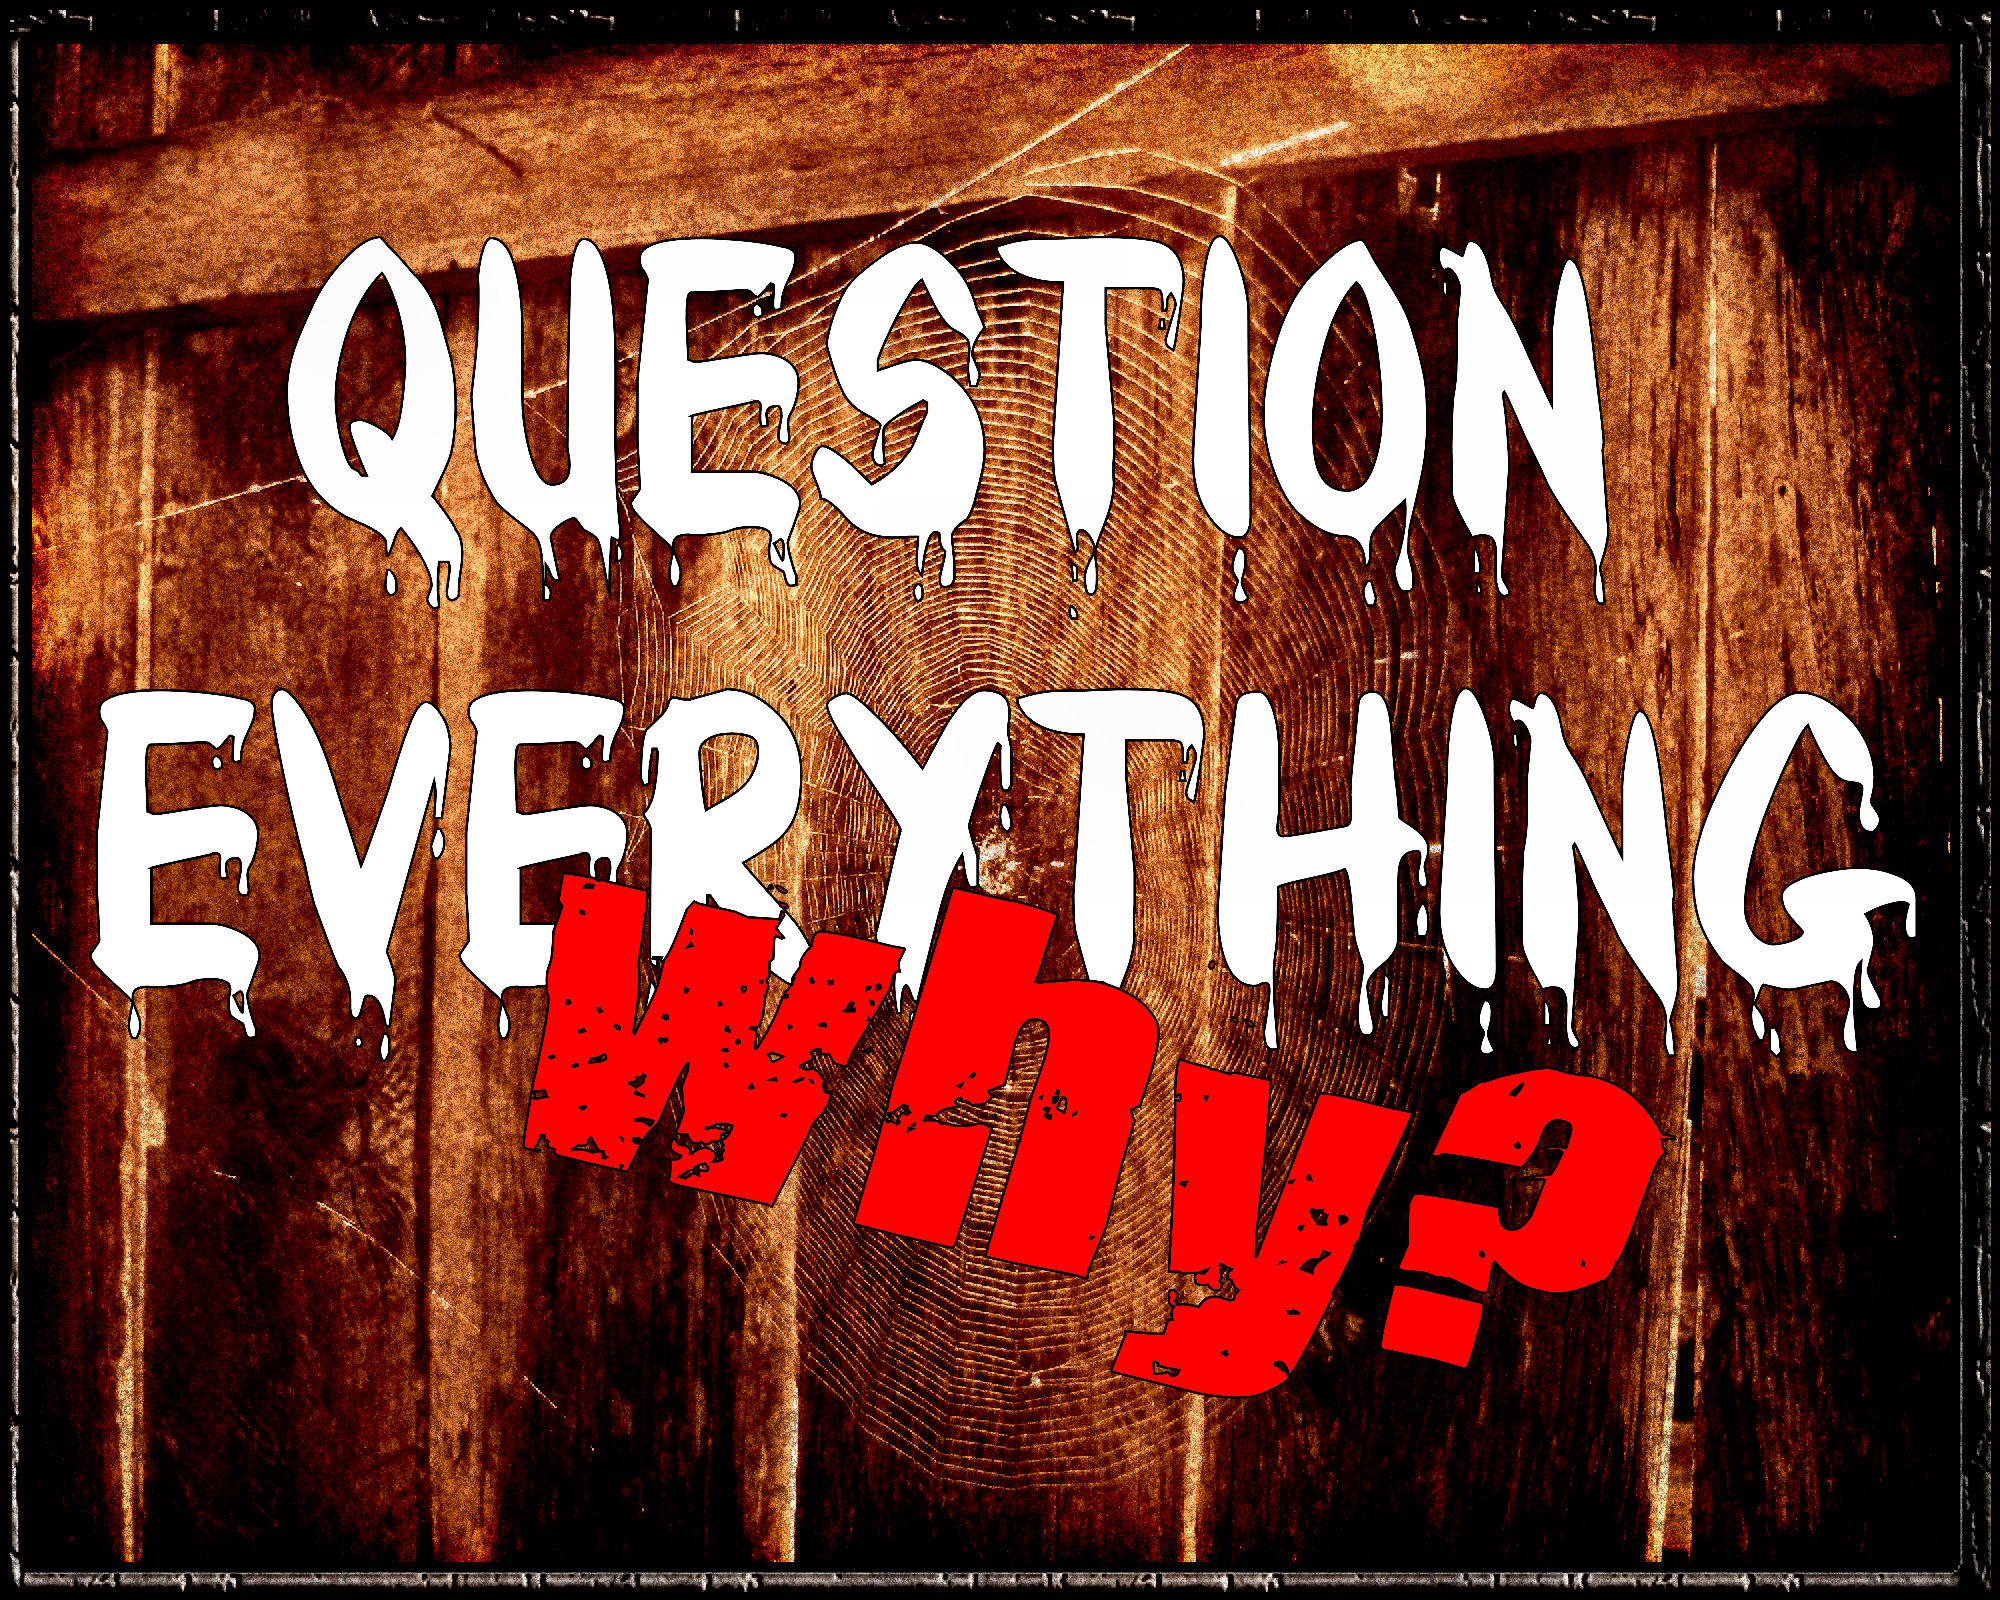 Words on wall say Question Everything with Why? written over part of it.